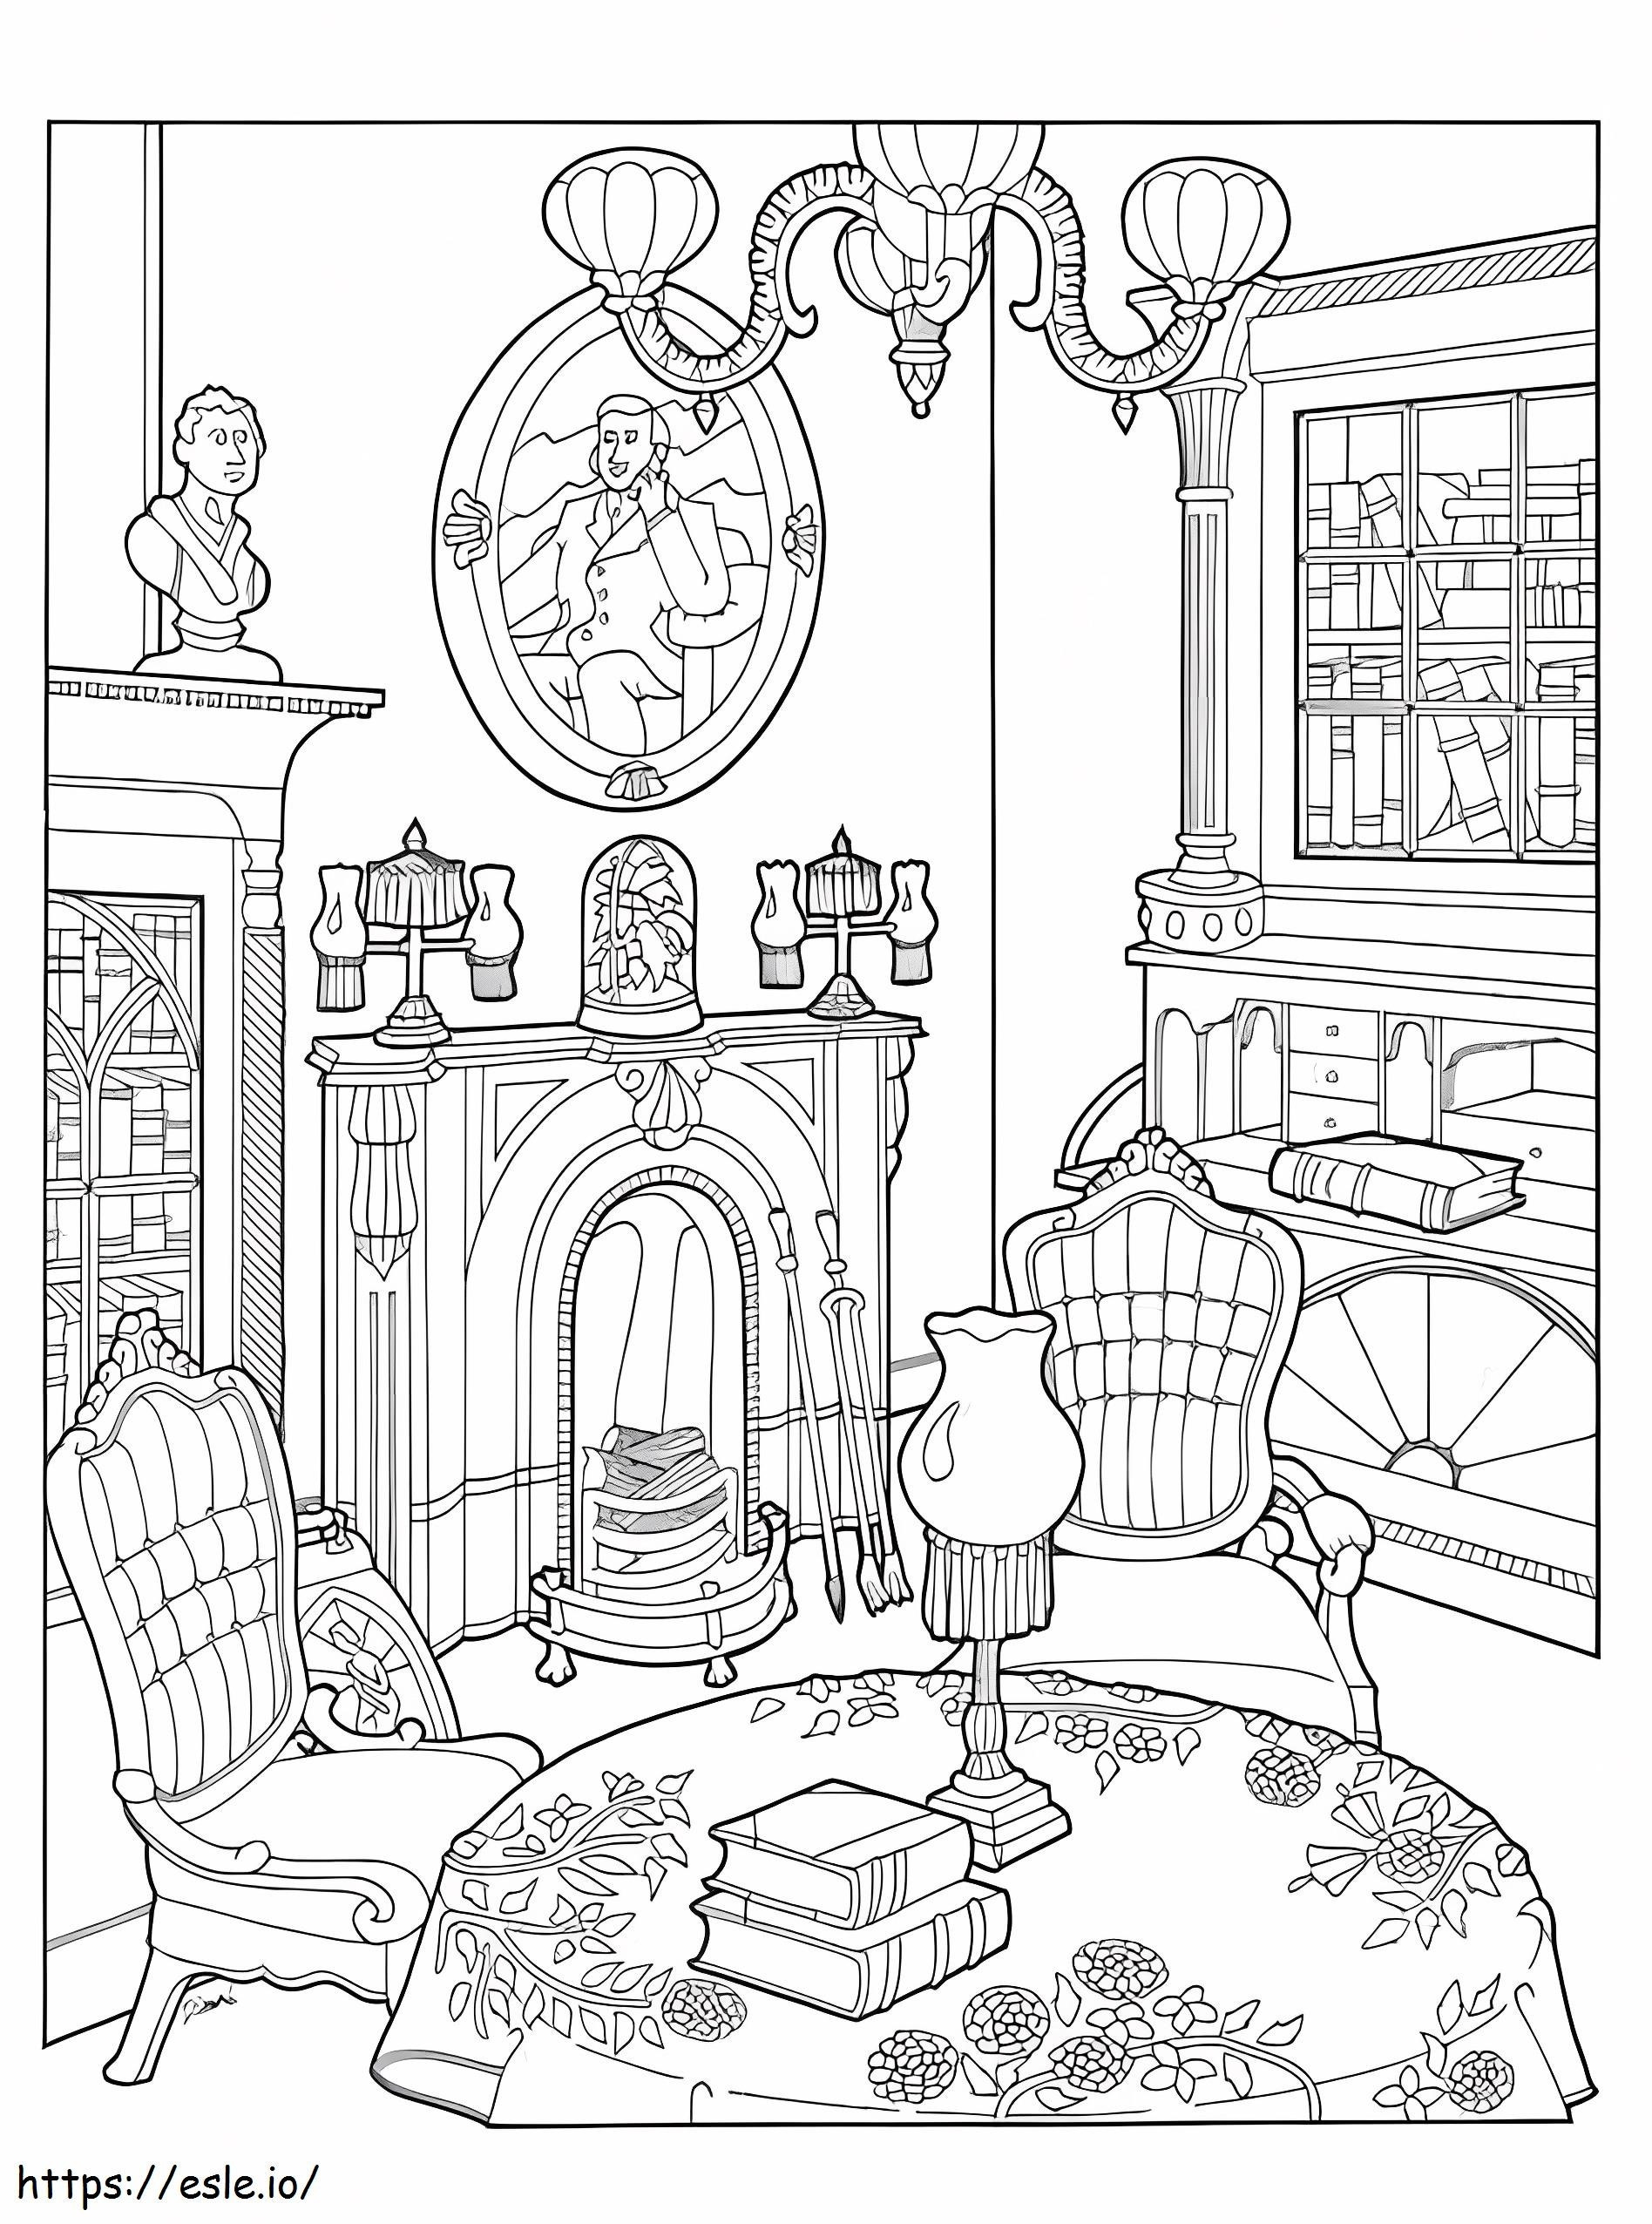 The Living Room Is For Adults coloring page